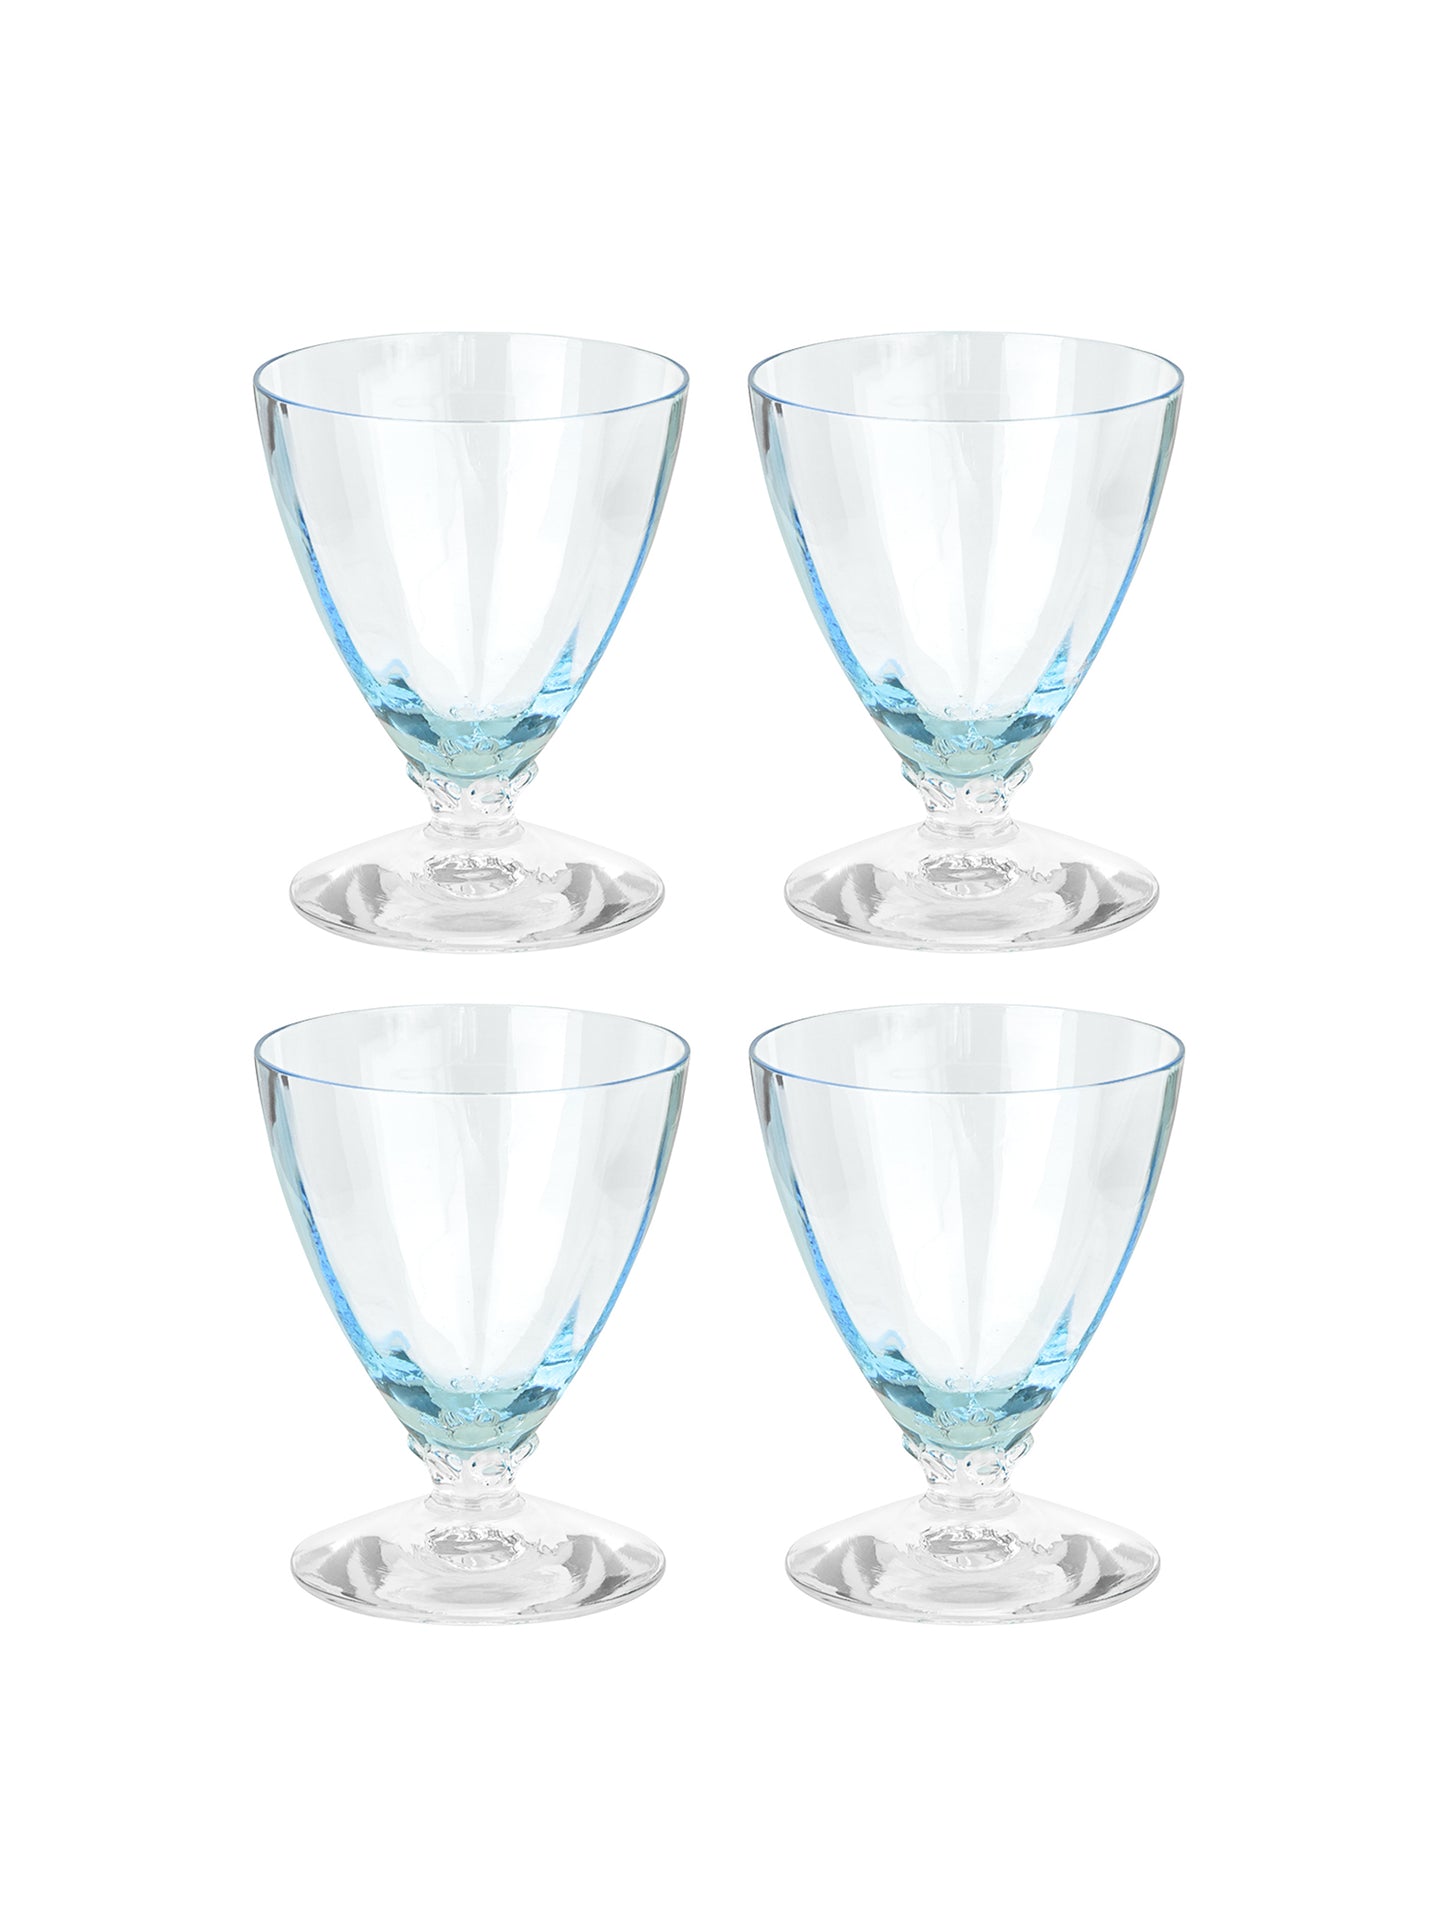 Vintage 1920s Fairfax Oyster Cocktail Glasses Weston Table